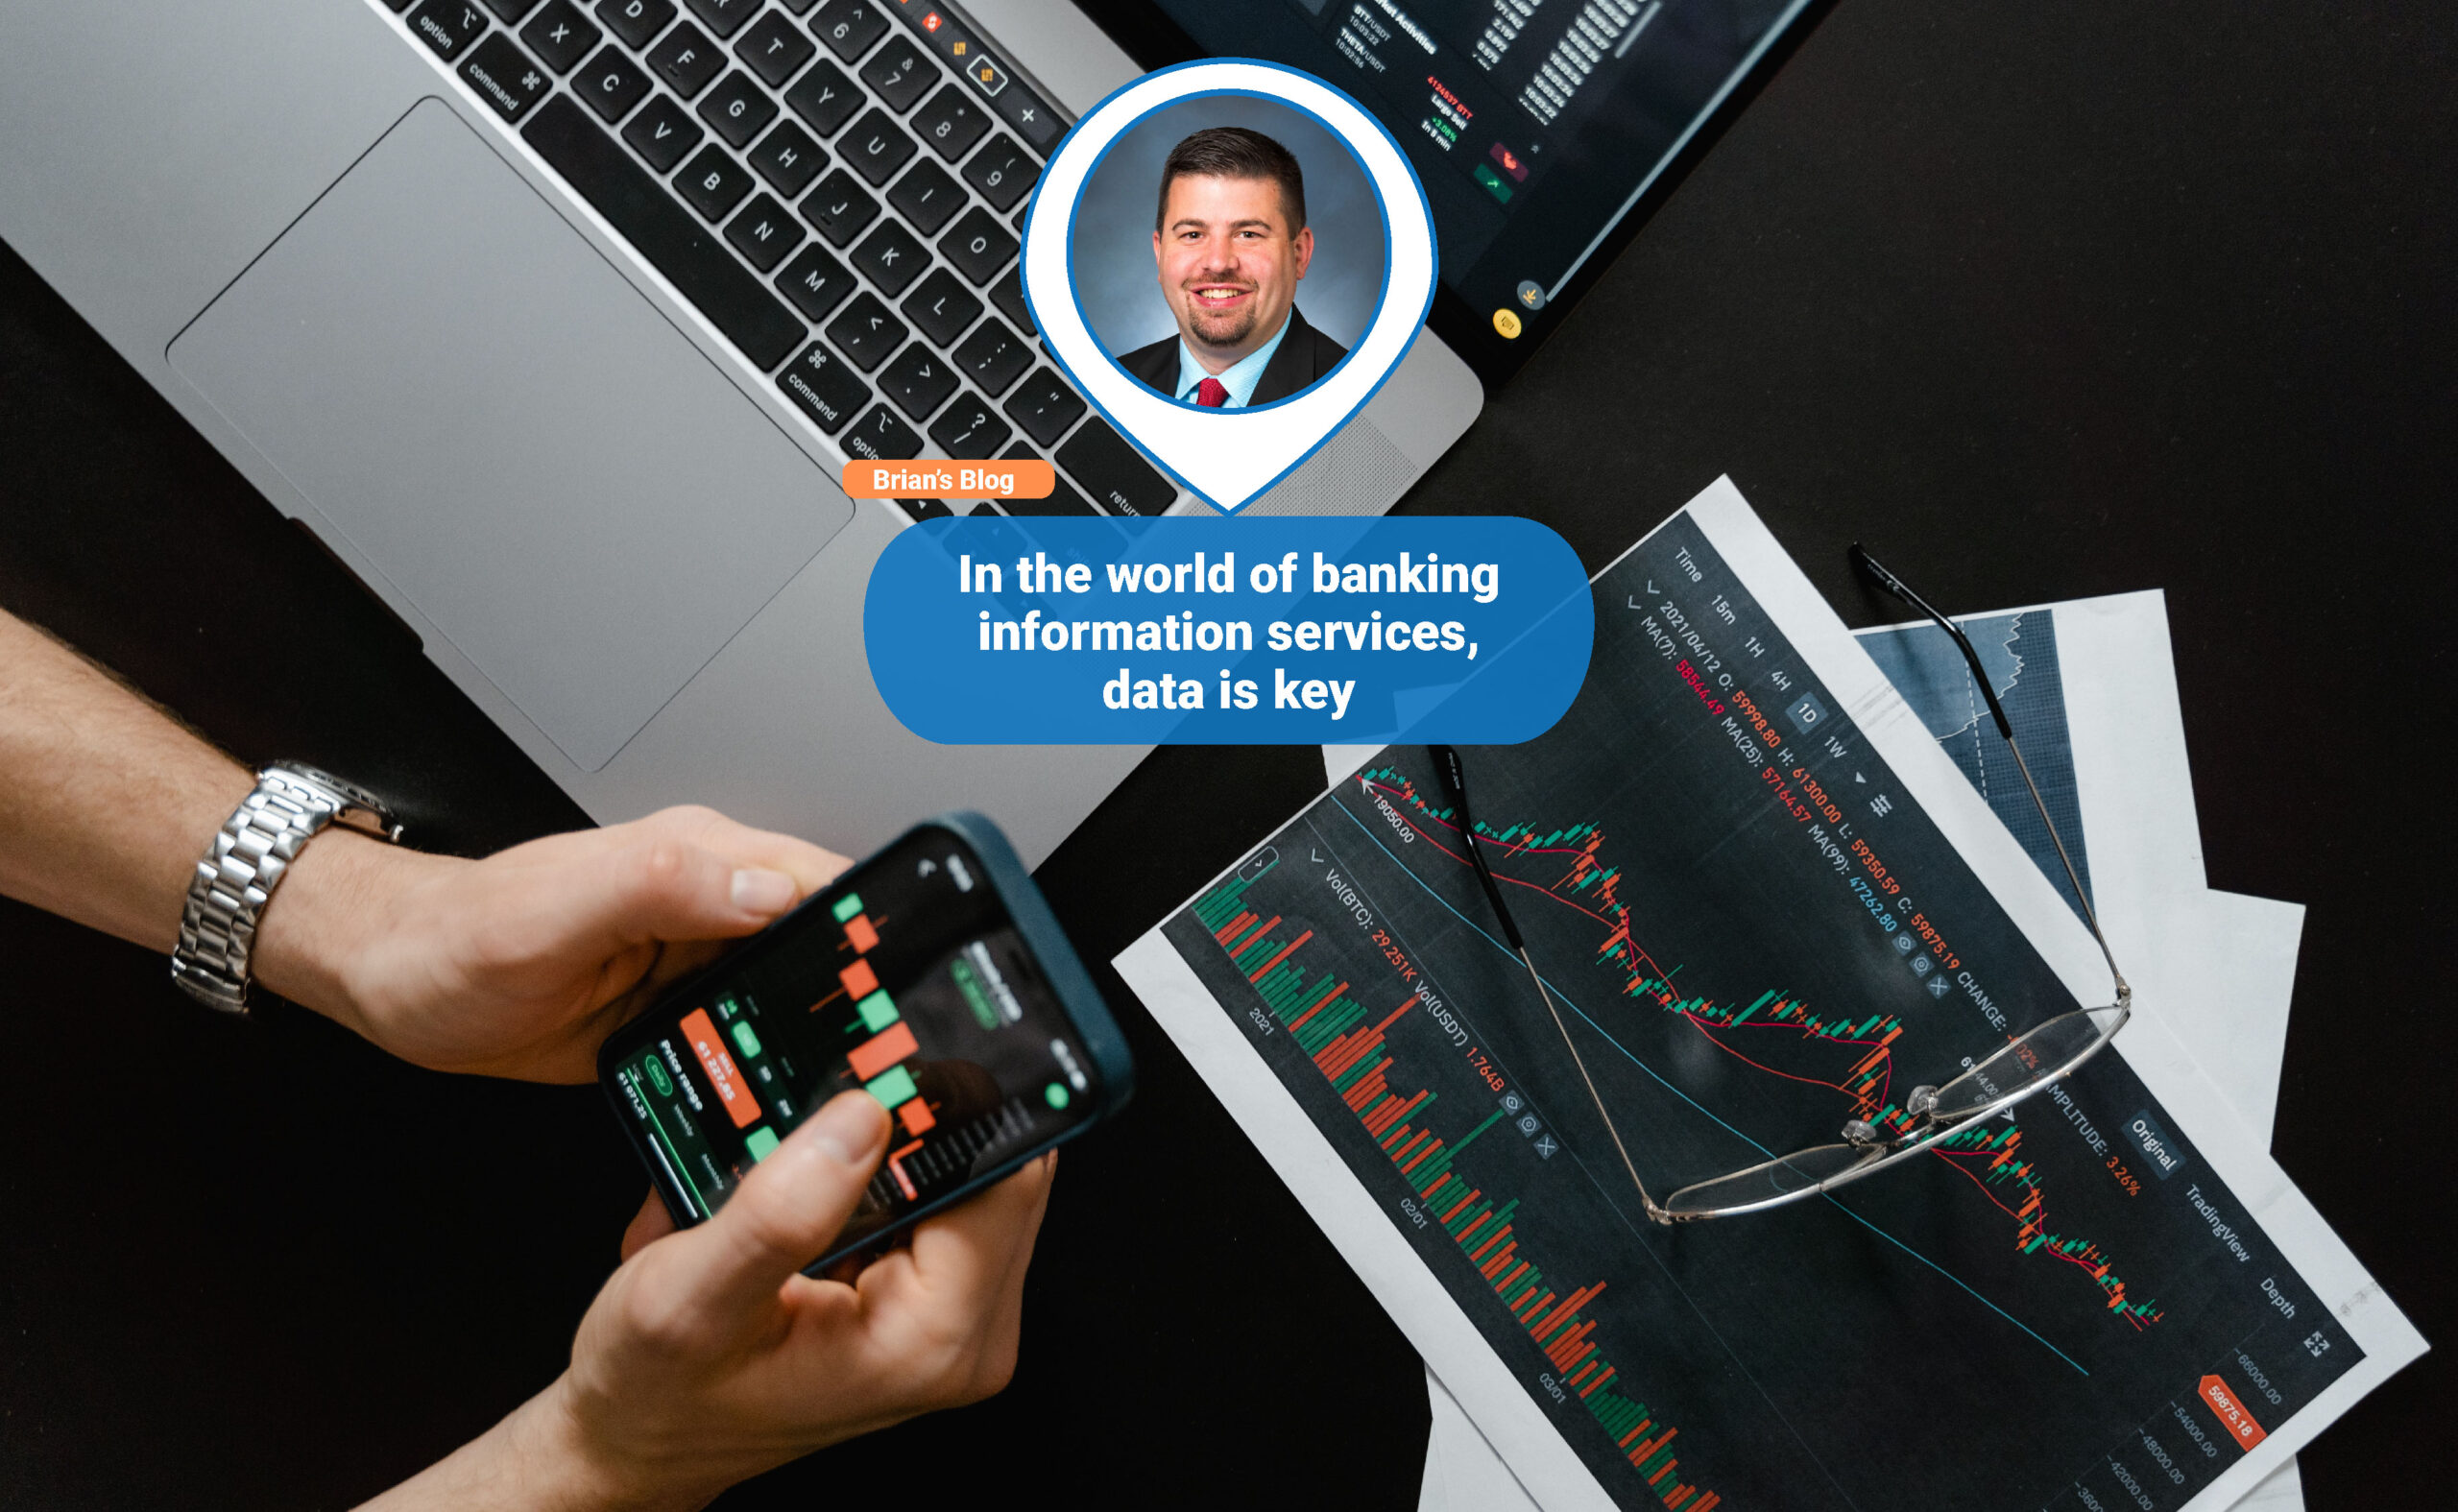 In the world of banking information services, data is key